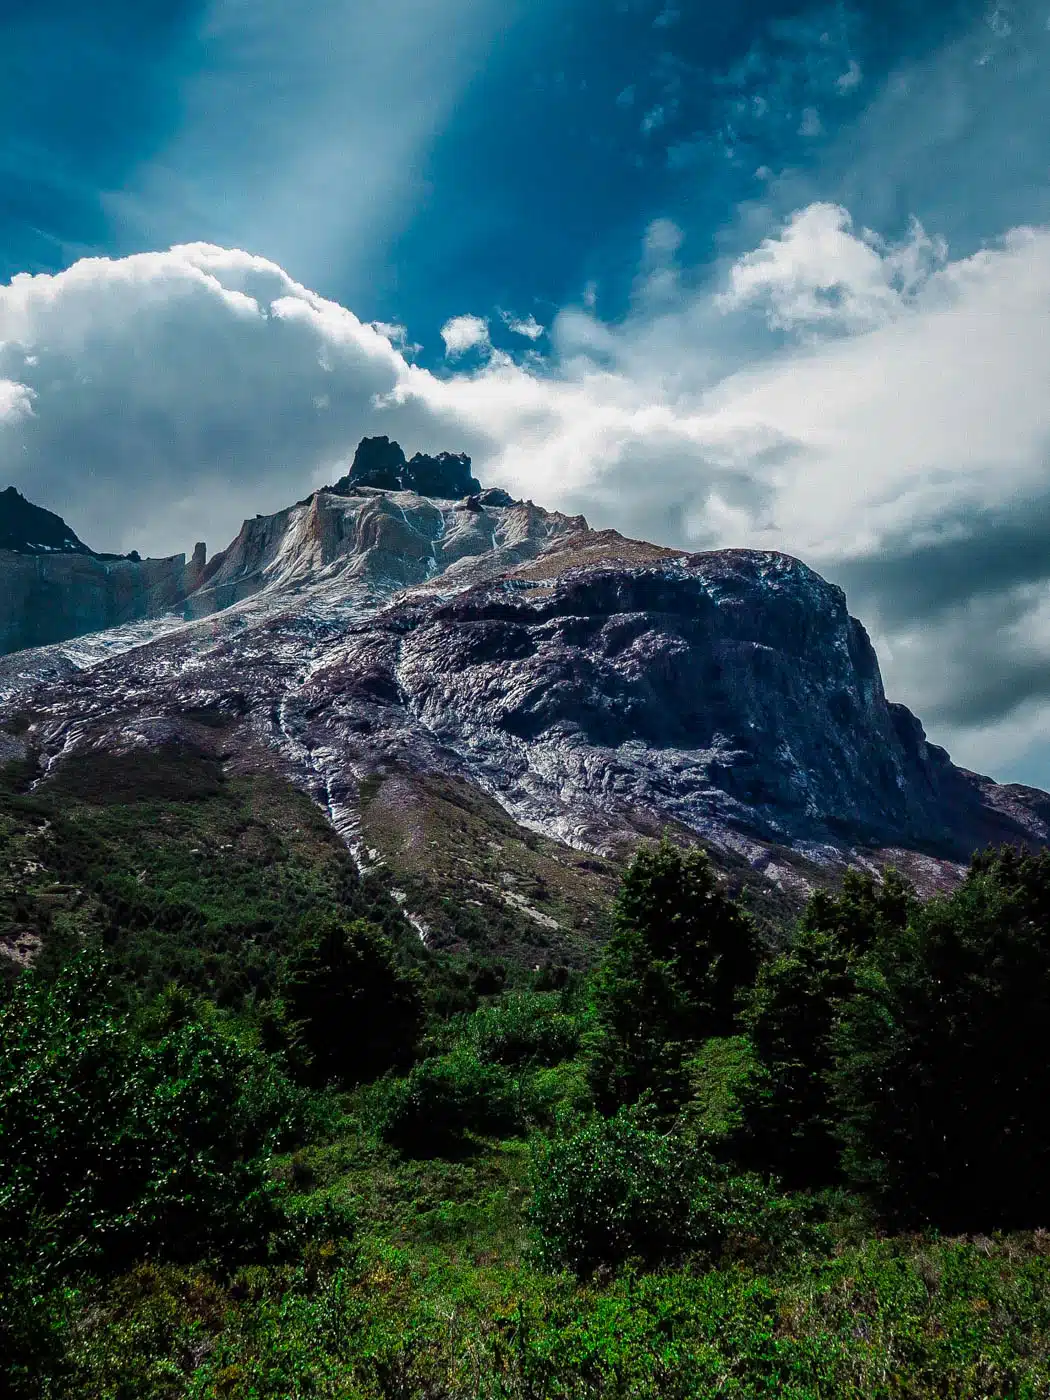 Torres del Paine I South America Travel Bucket List. 90 Awesome Things to do in South America When Backpacking and Travelling #southamerica #bucketlist #traveldestinations -3